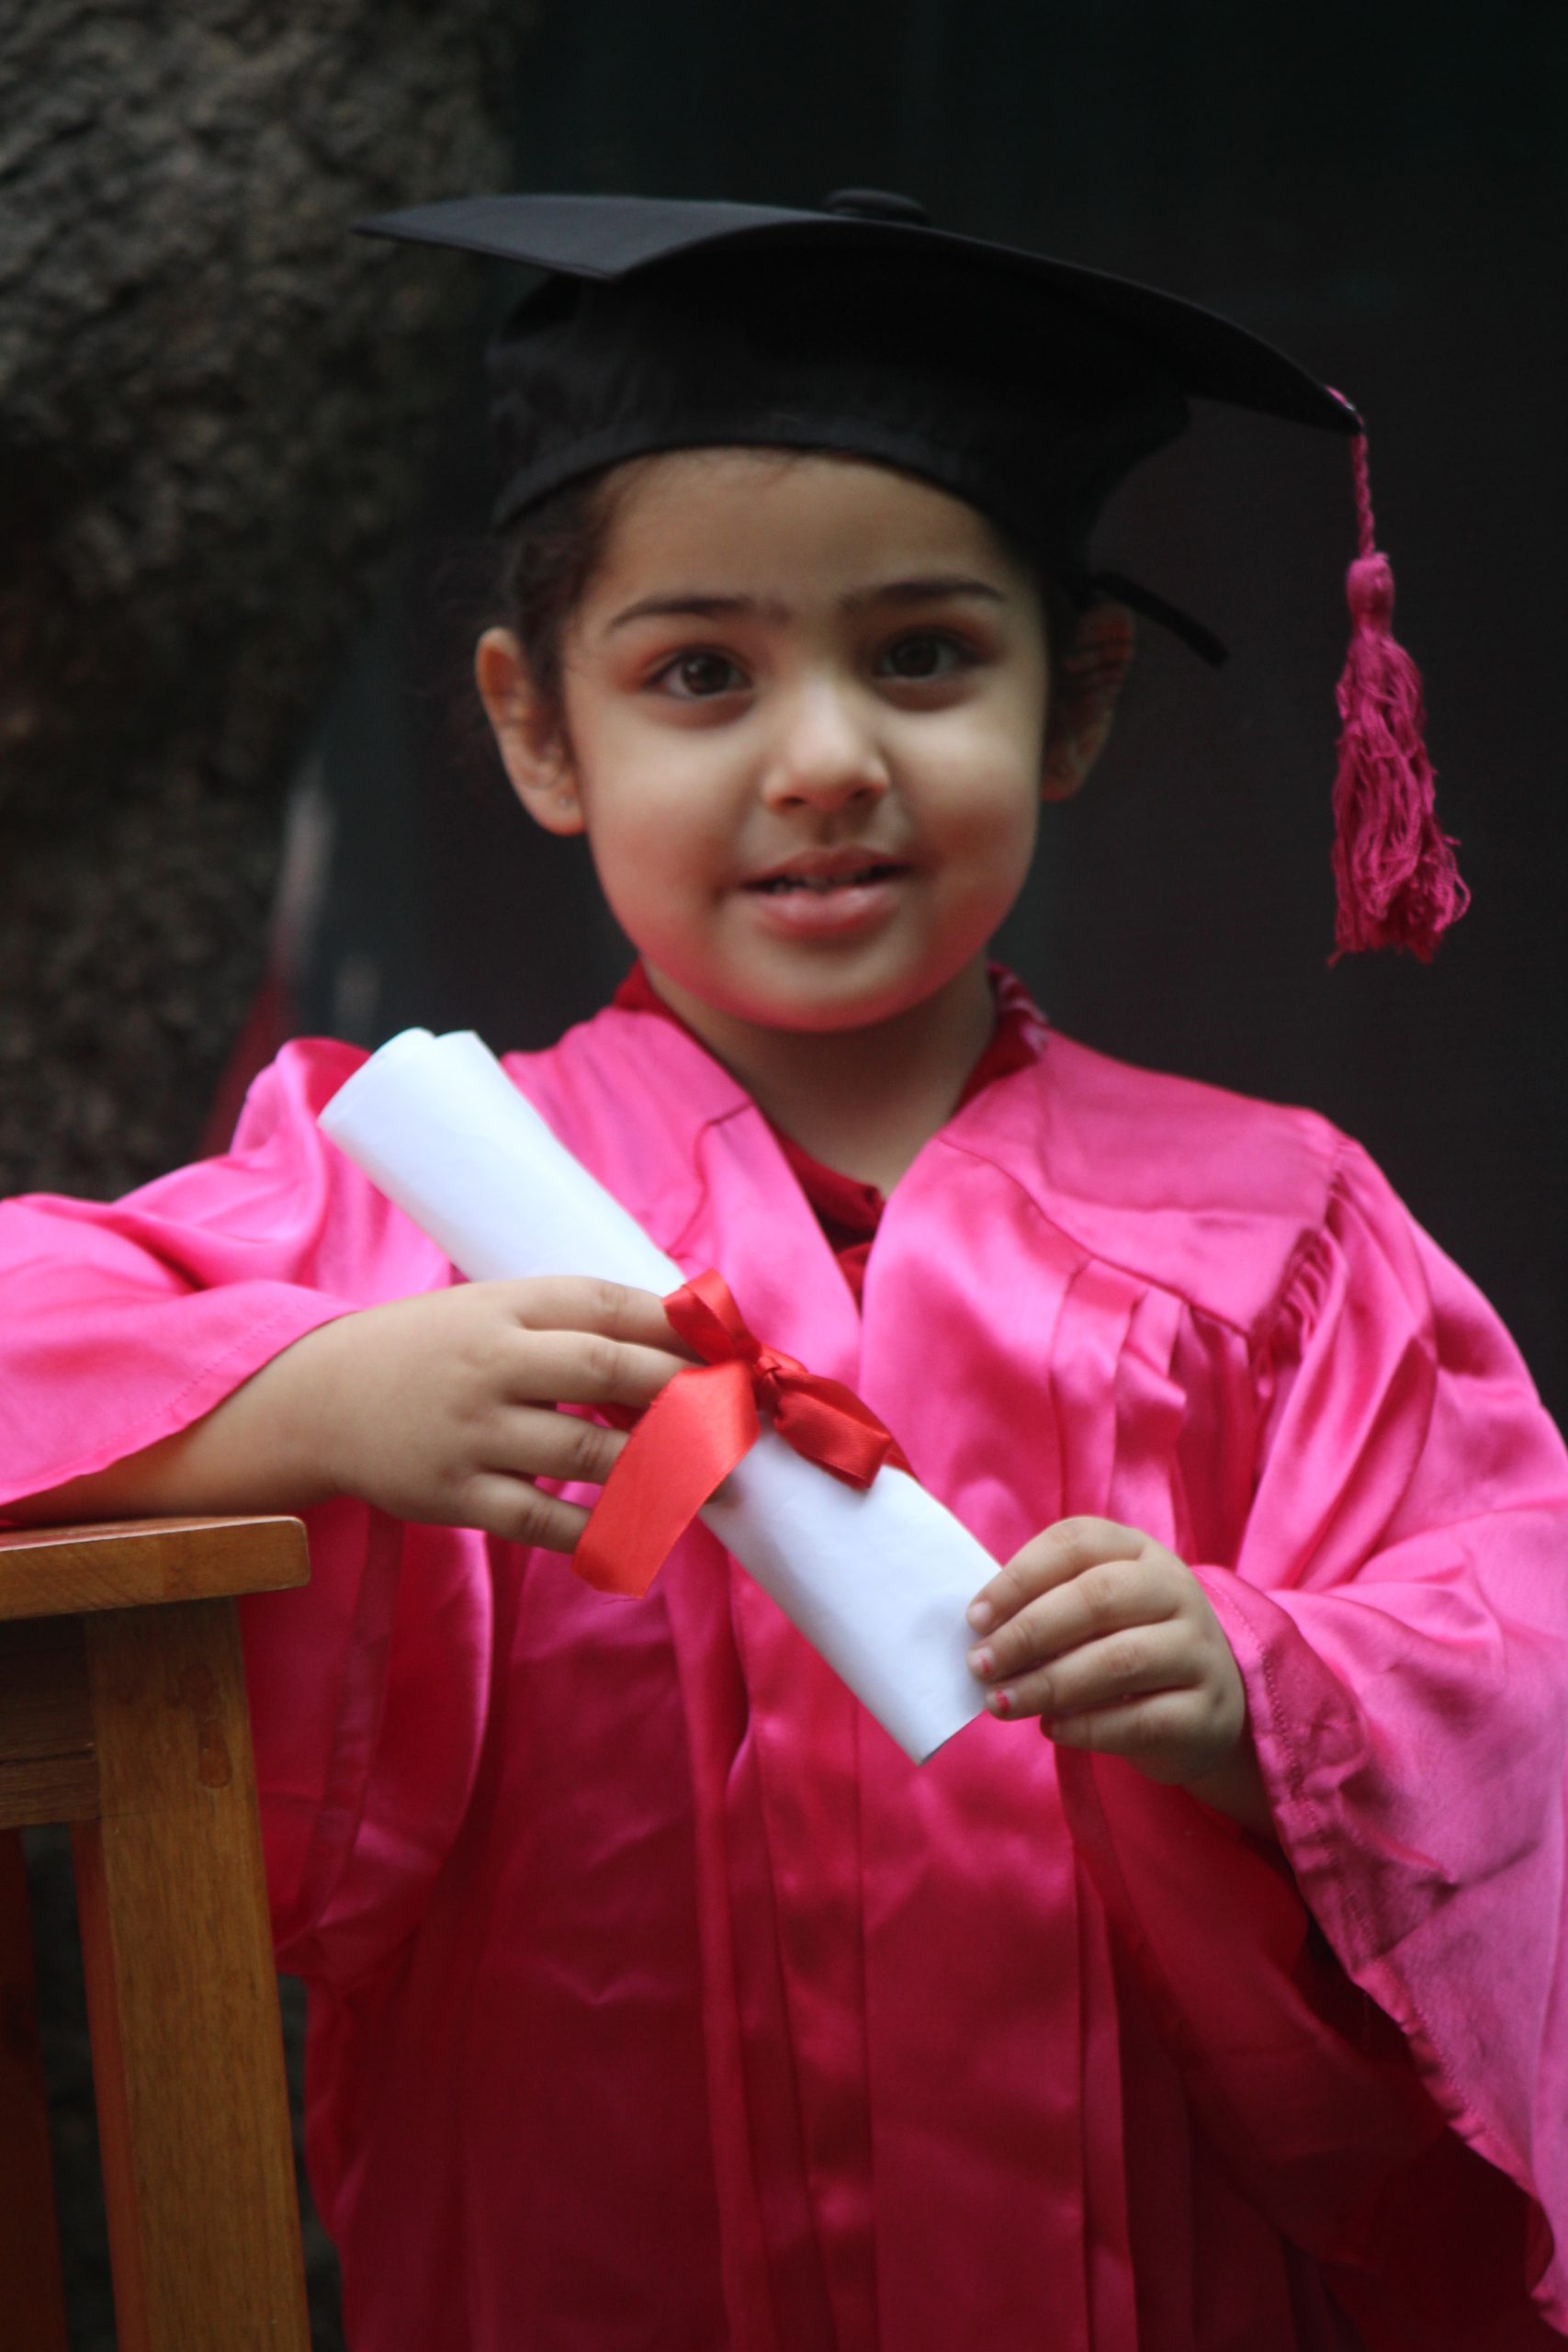 A little girl in graduation day getup